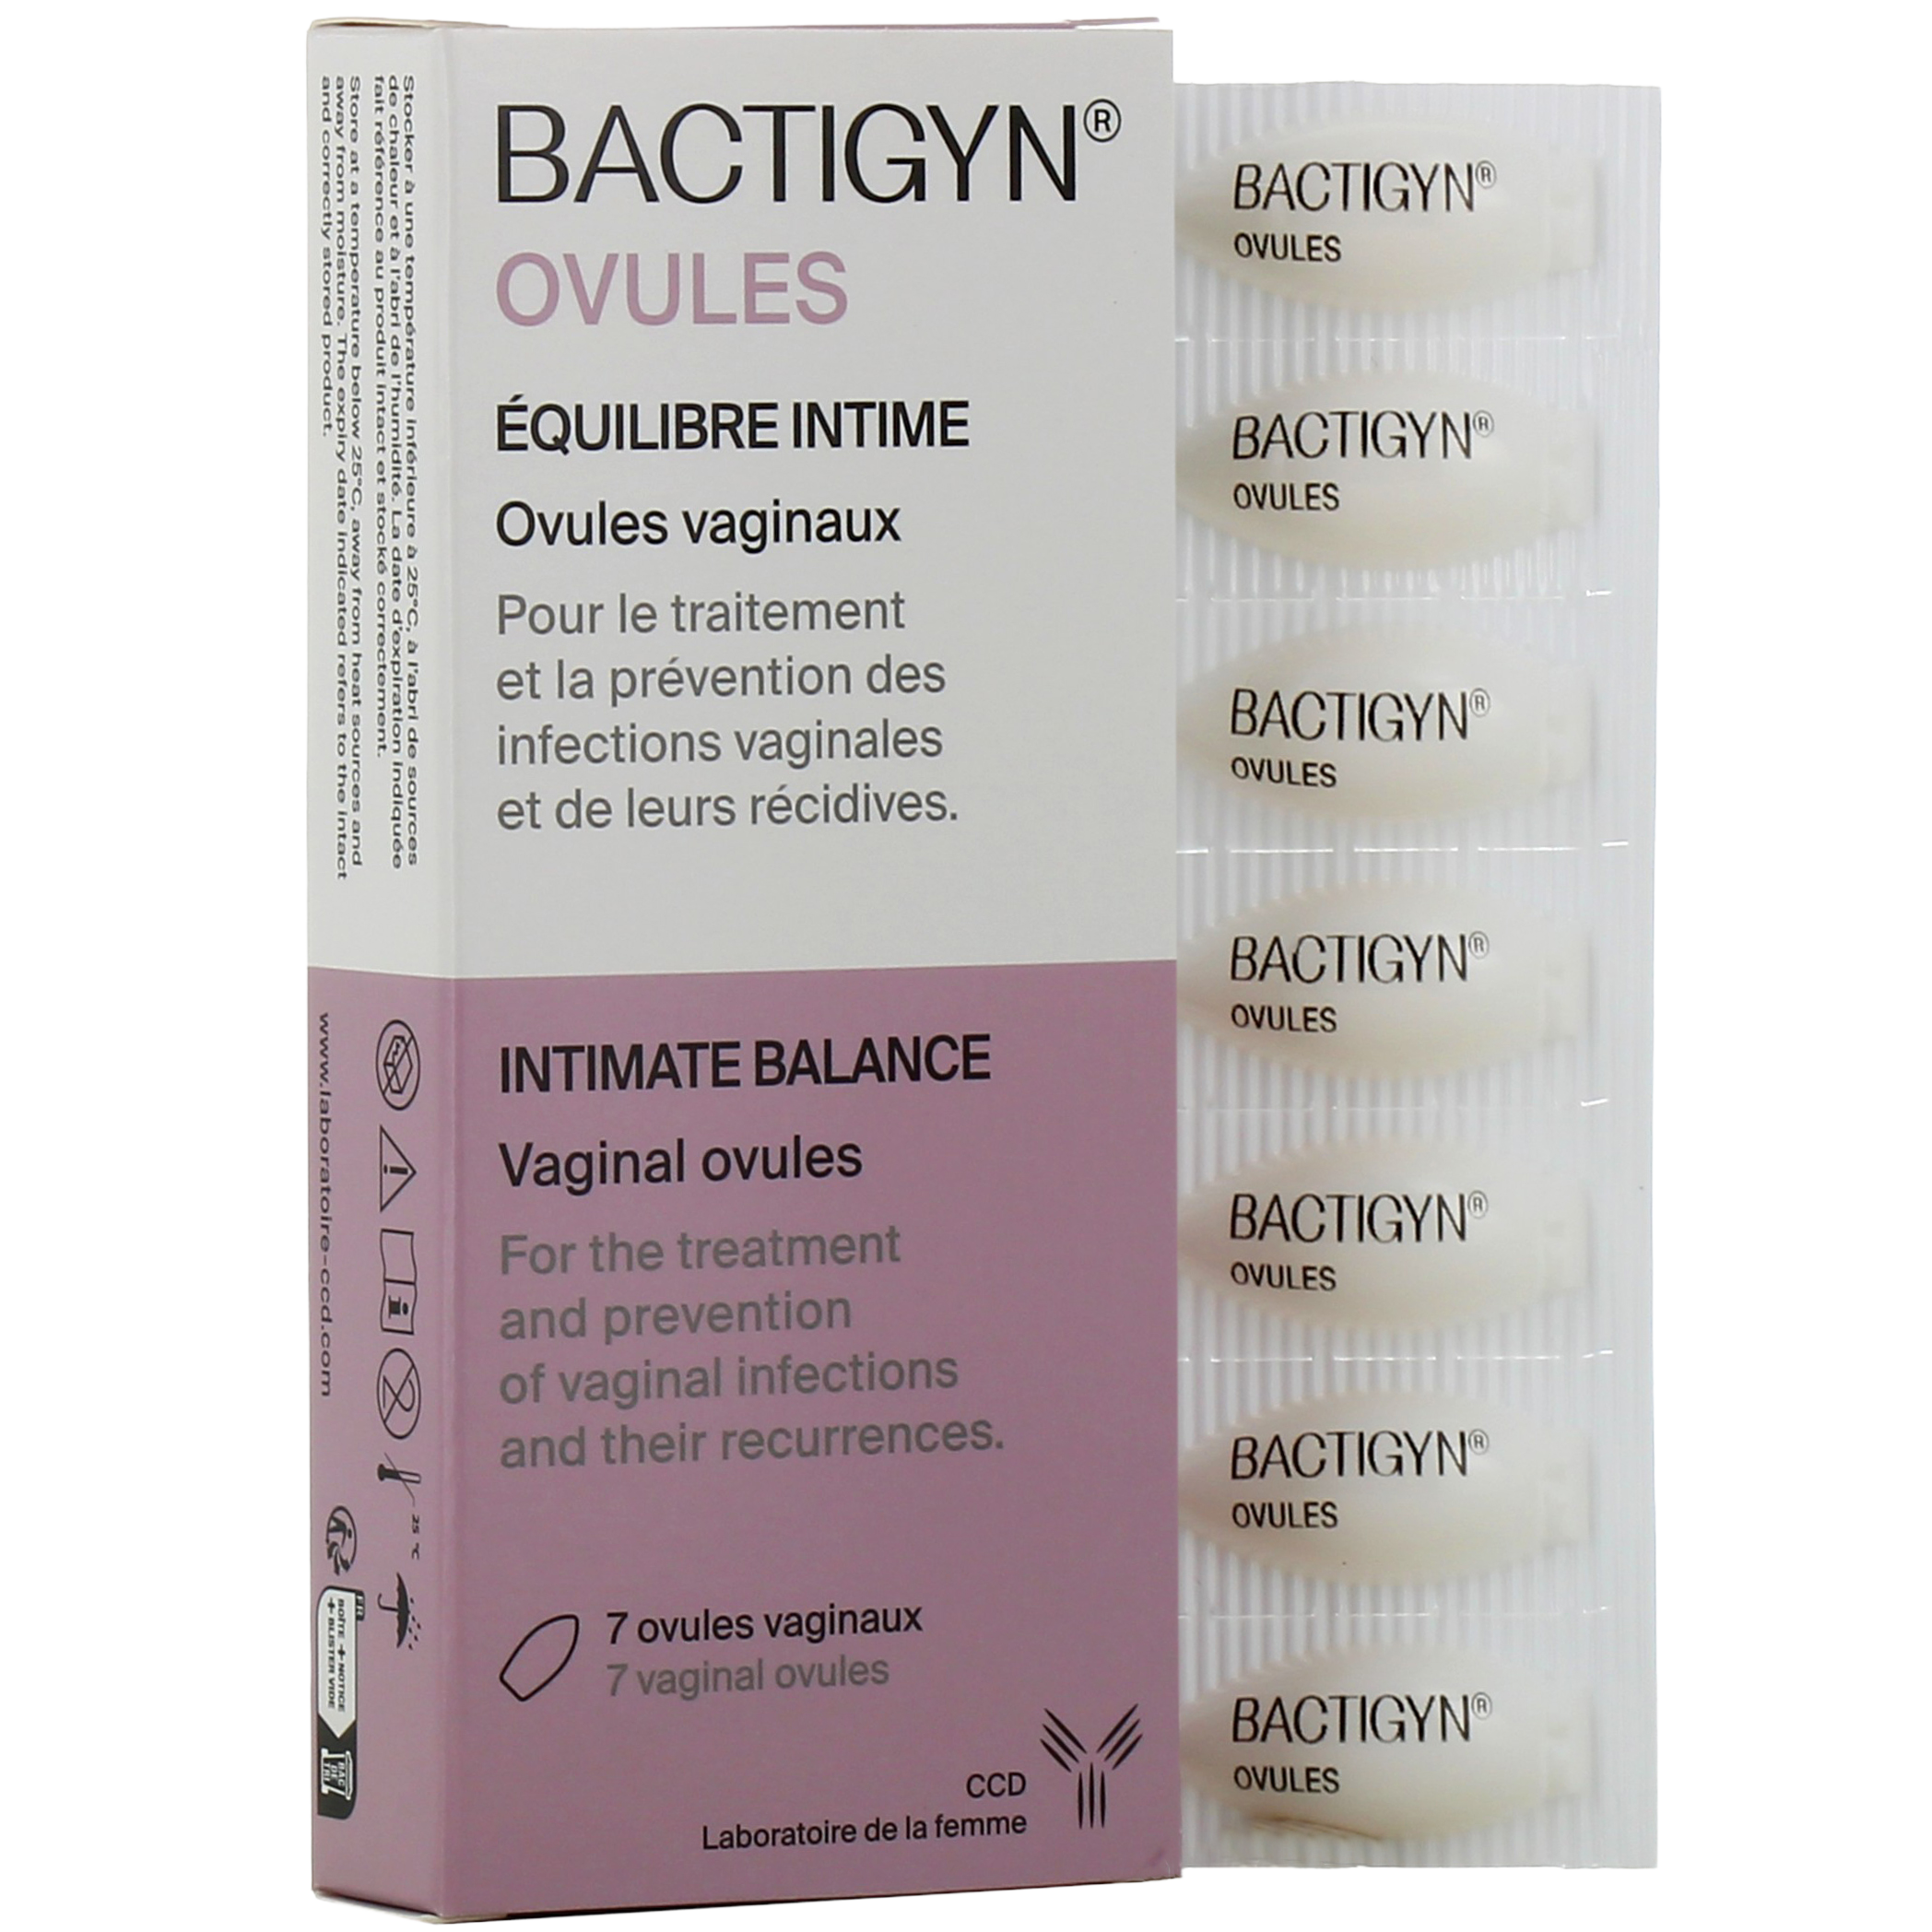 Bactigyn ovules vaginaux pour flore intime - Vaginose, mycose